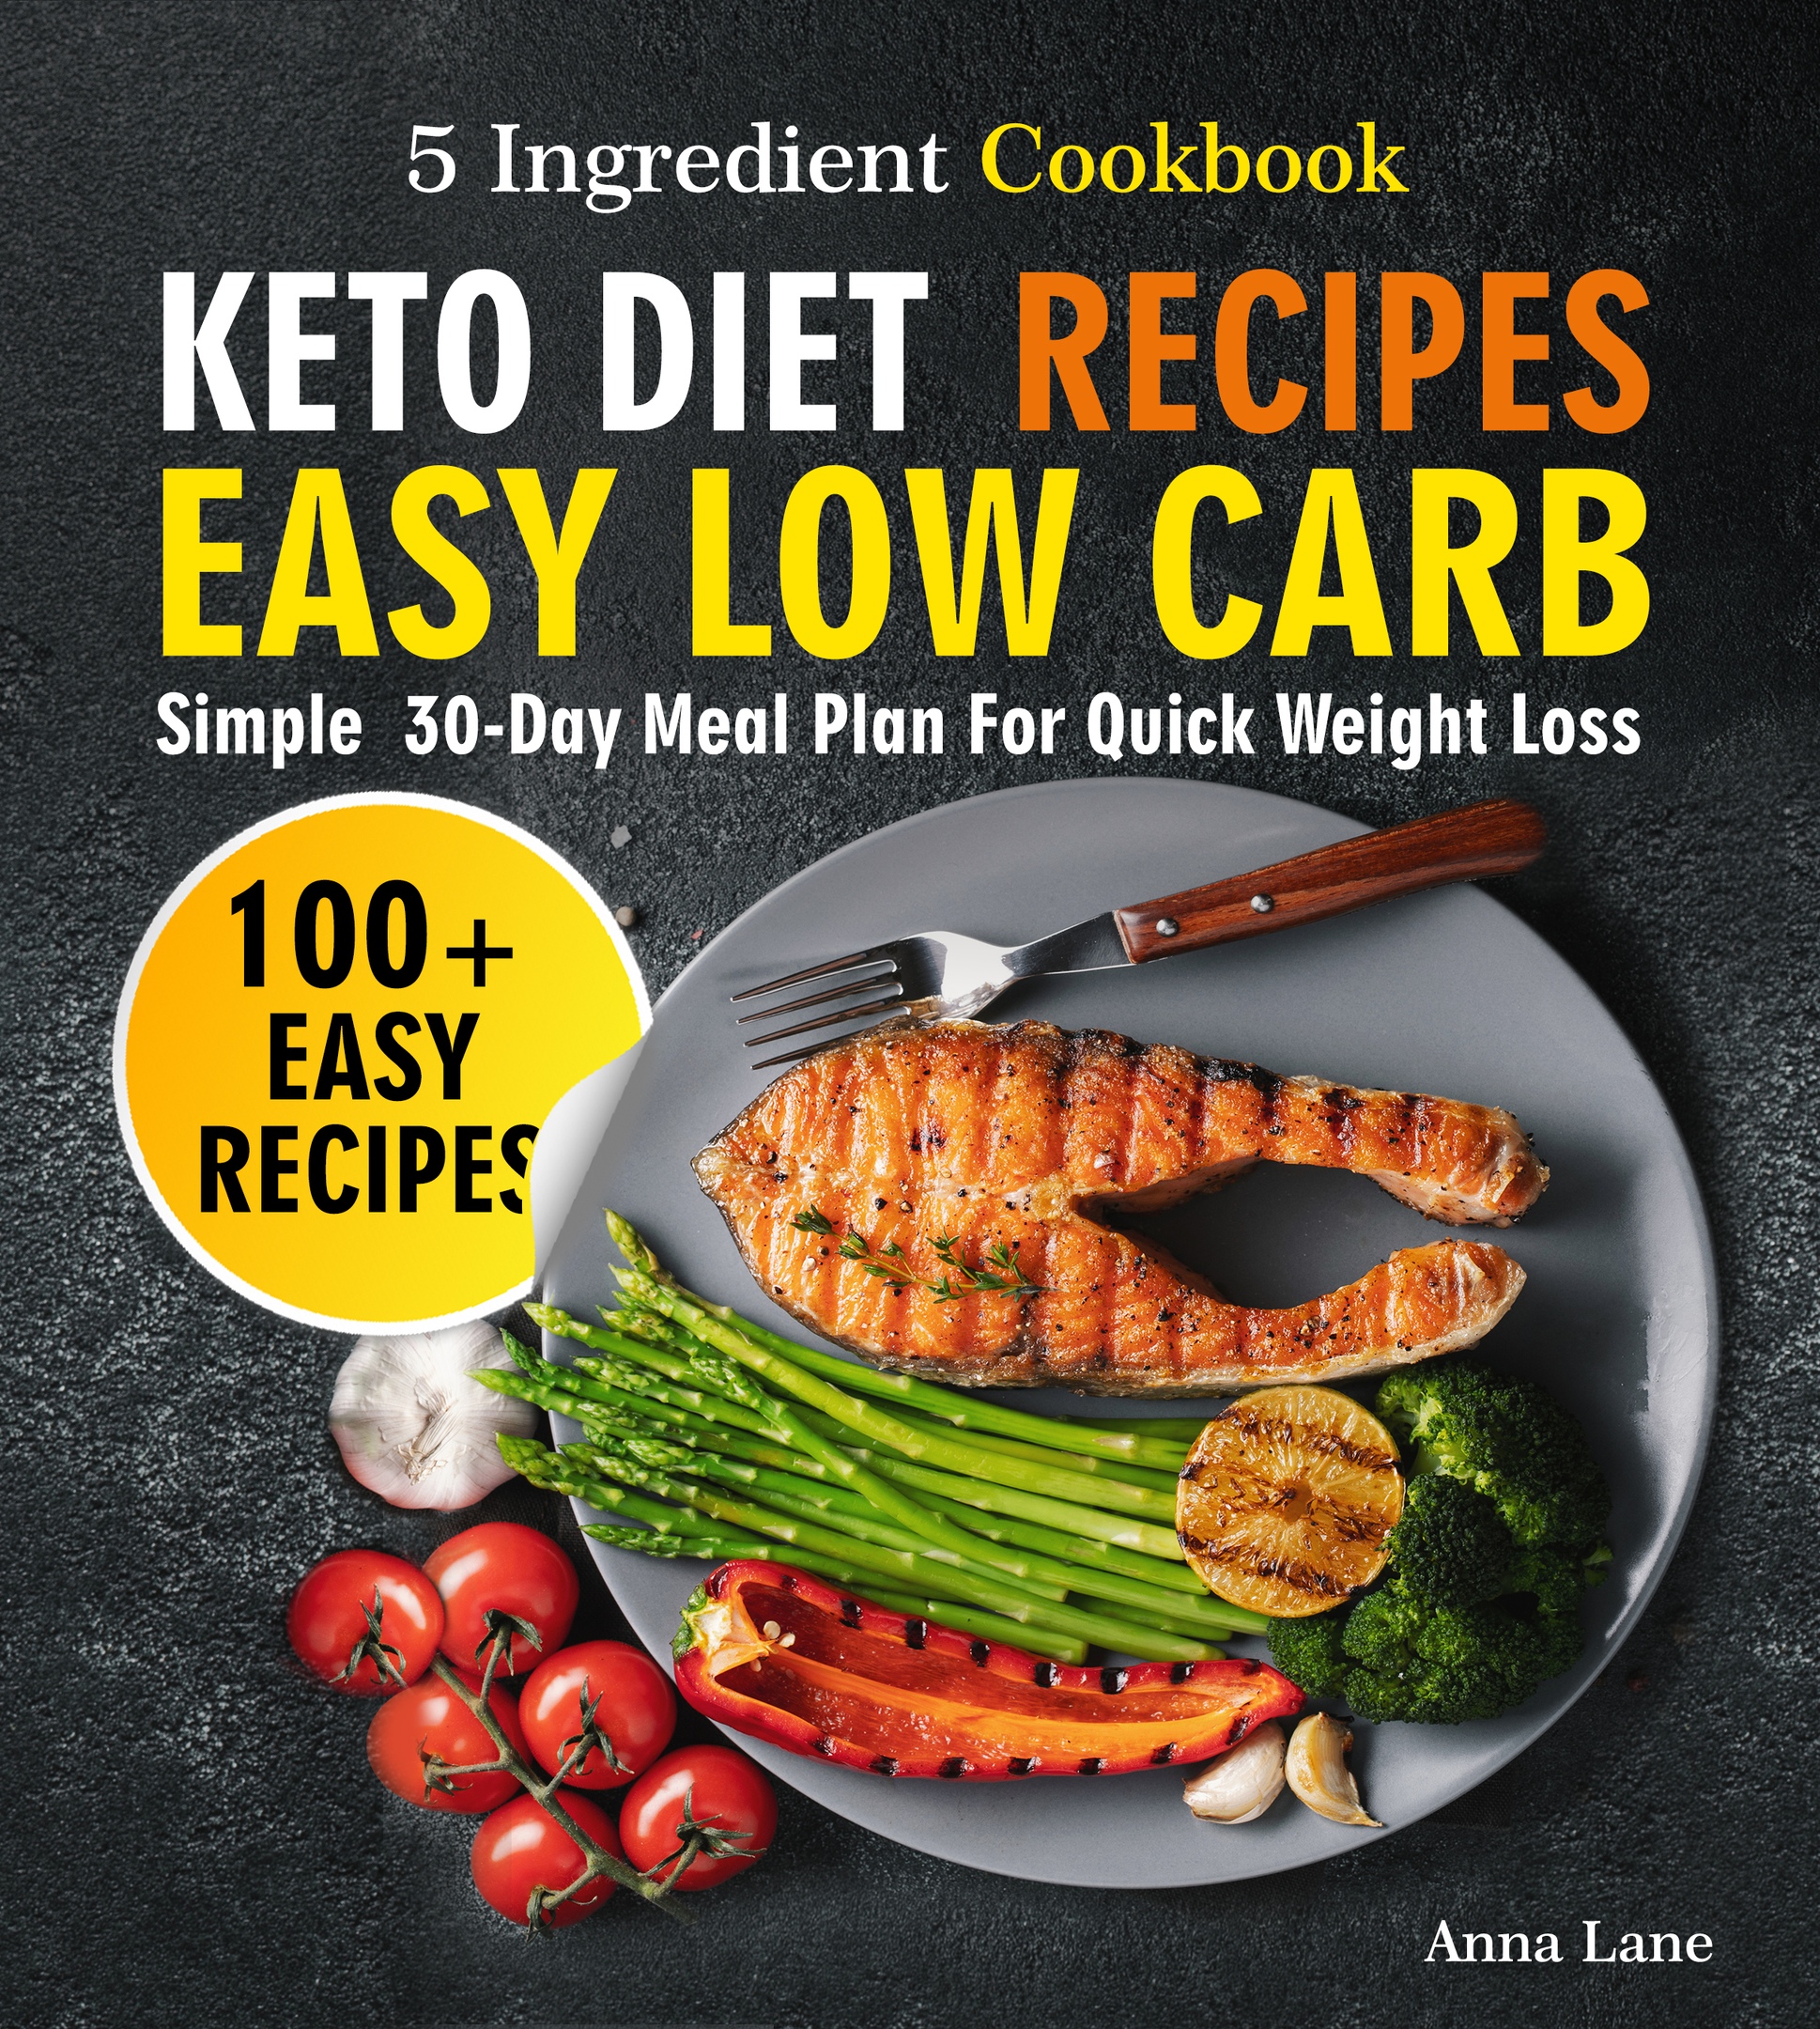 FREE: Keto Diet Recipes. Easy, Low Carb, 5-Ingredient Cookbook: Simple 30-Day Meal Plan for Quick Weight Loss by Anna Lane